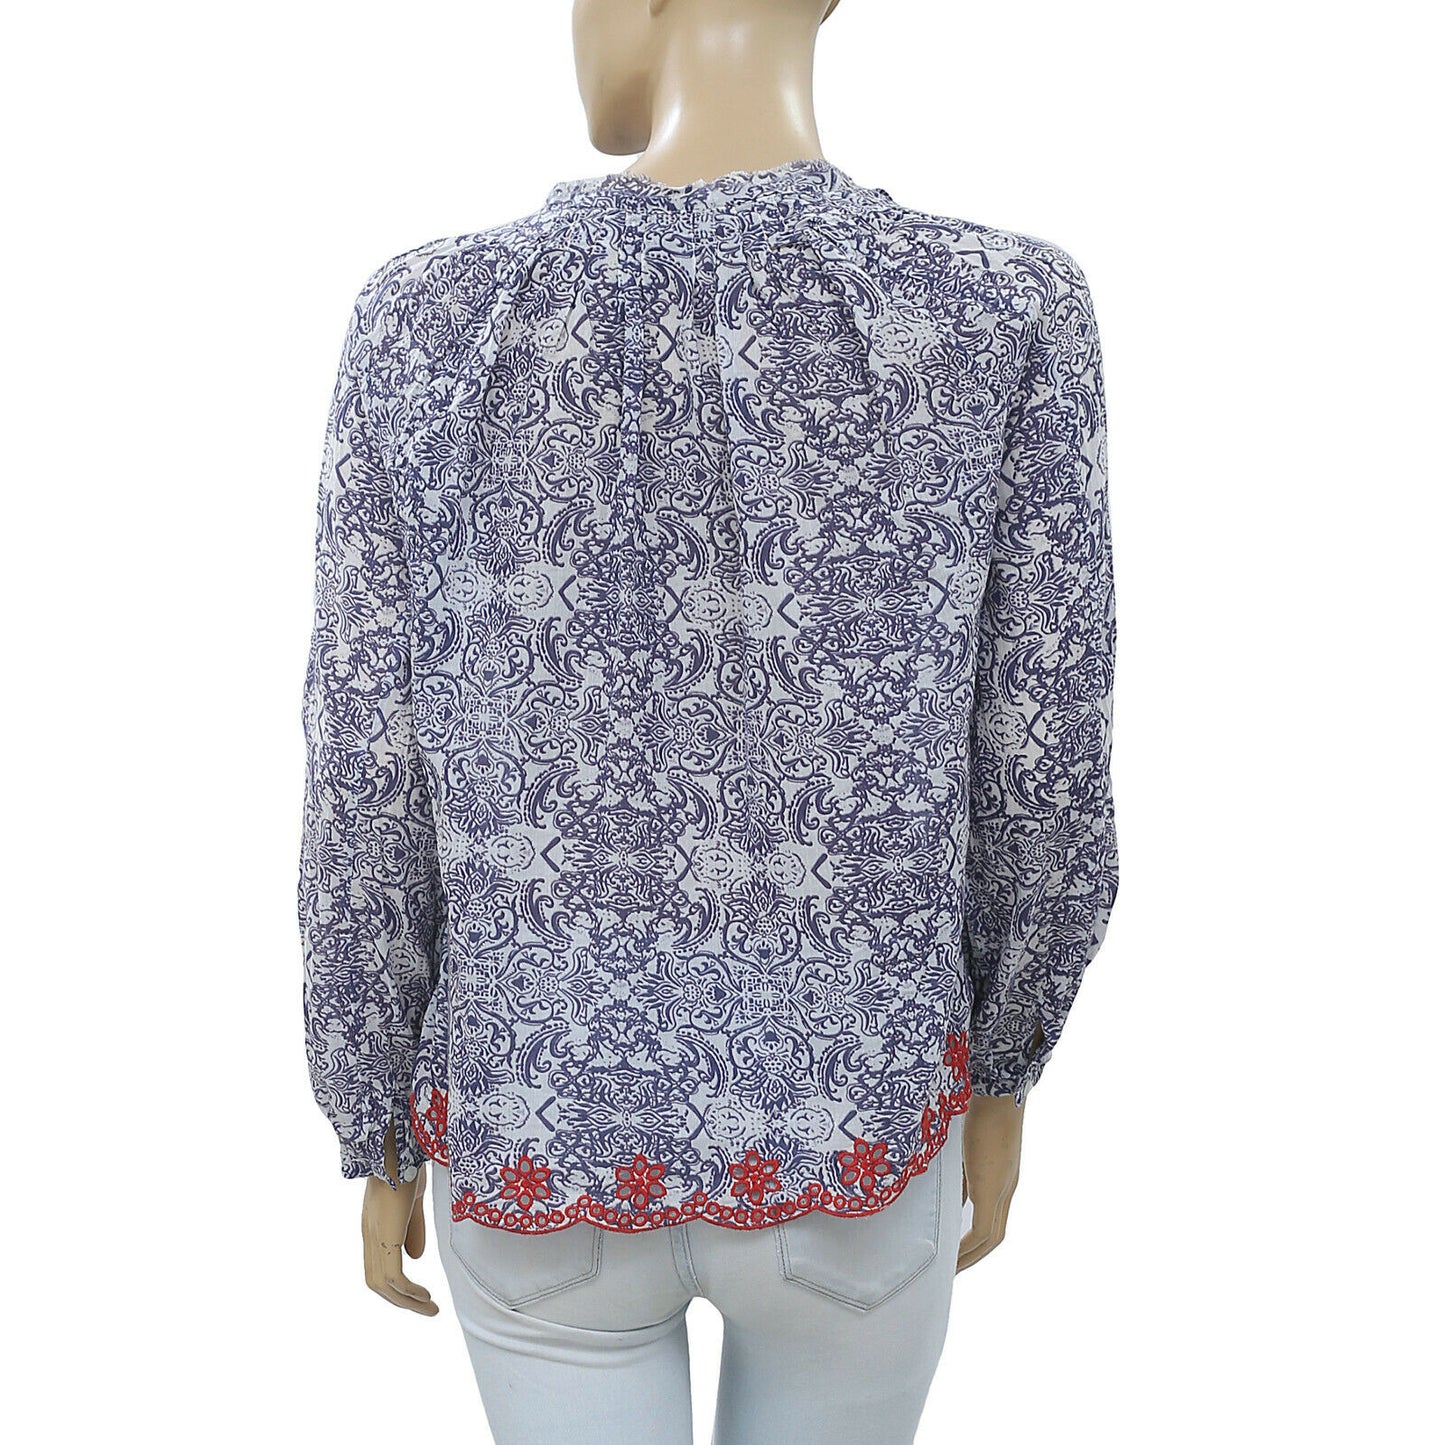 Berenice Eyelet Embroidered Floral Printed Blouse Top